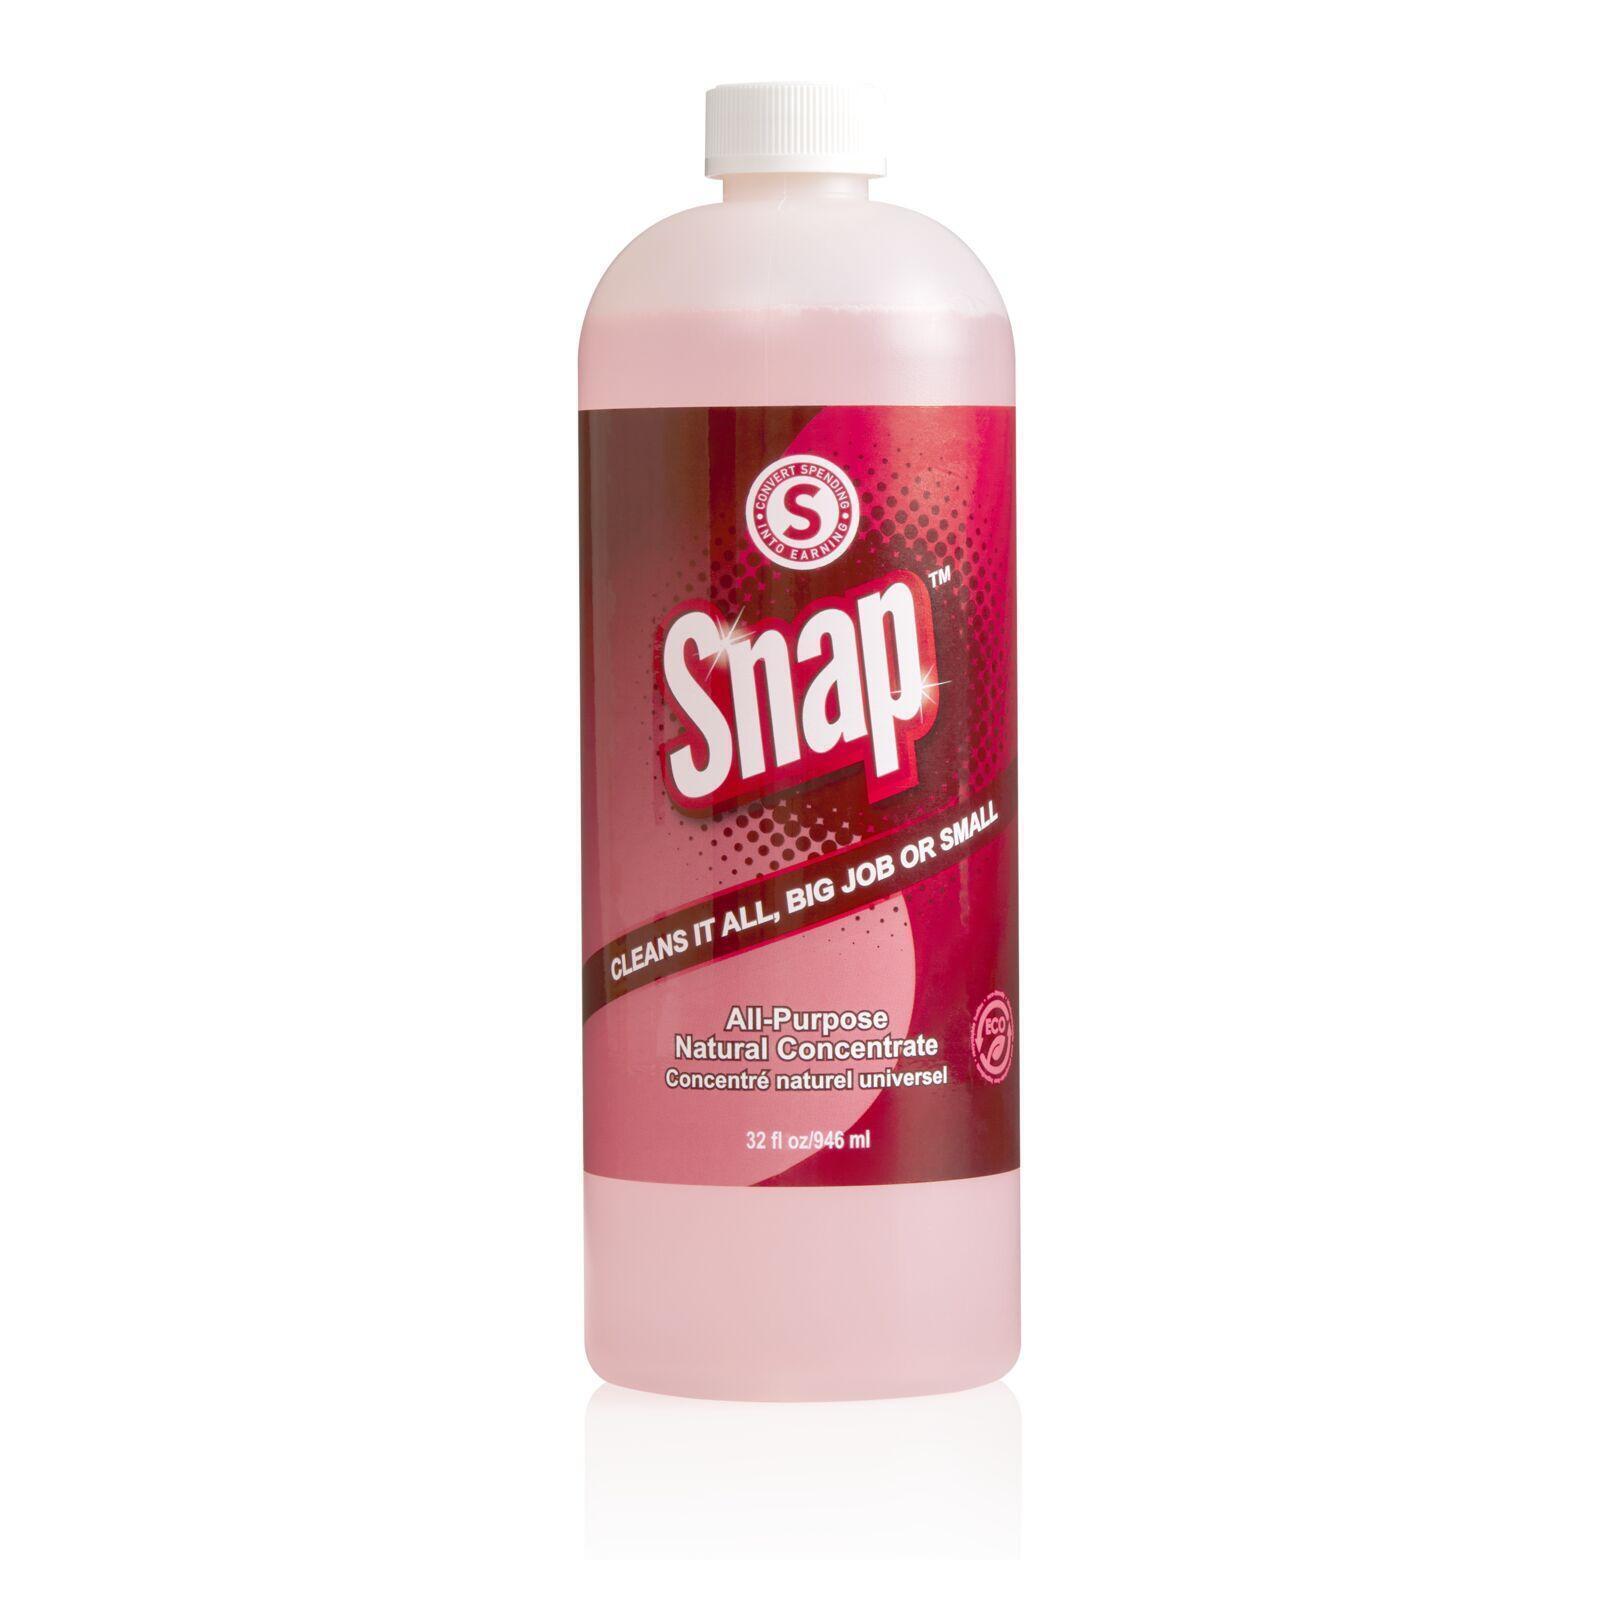 Snap All-Purpose Natural Concentrate